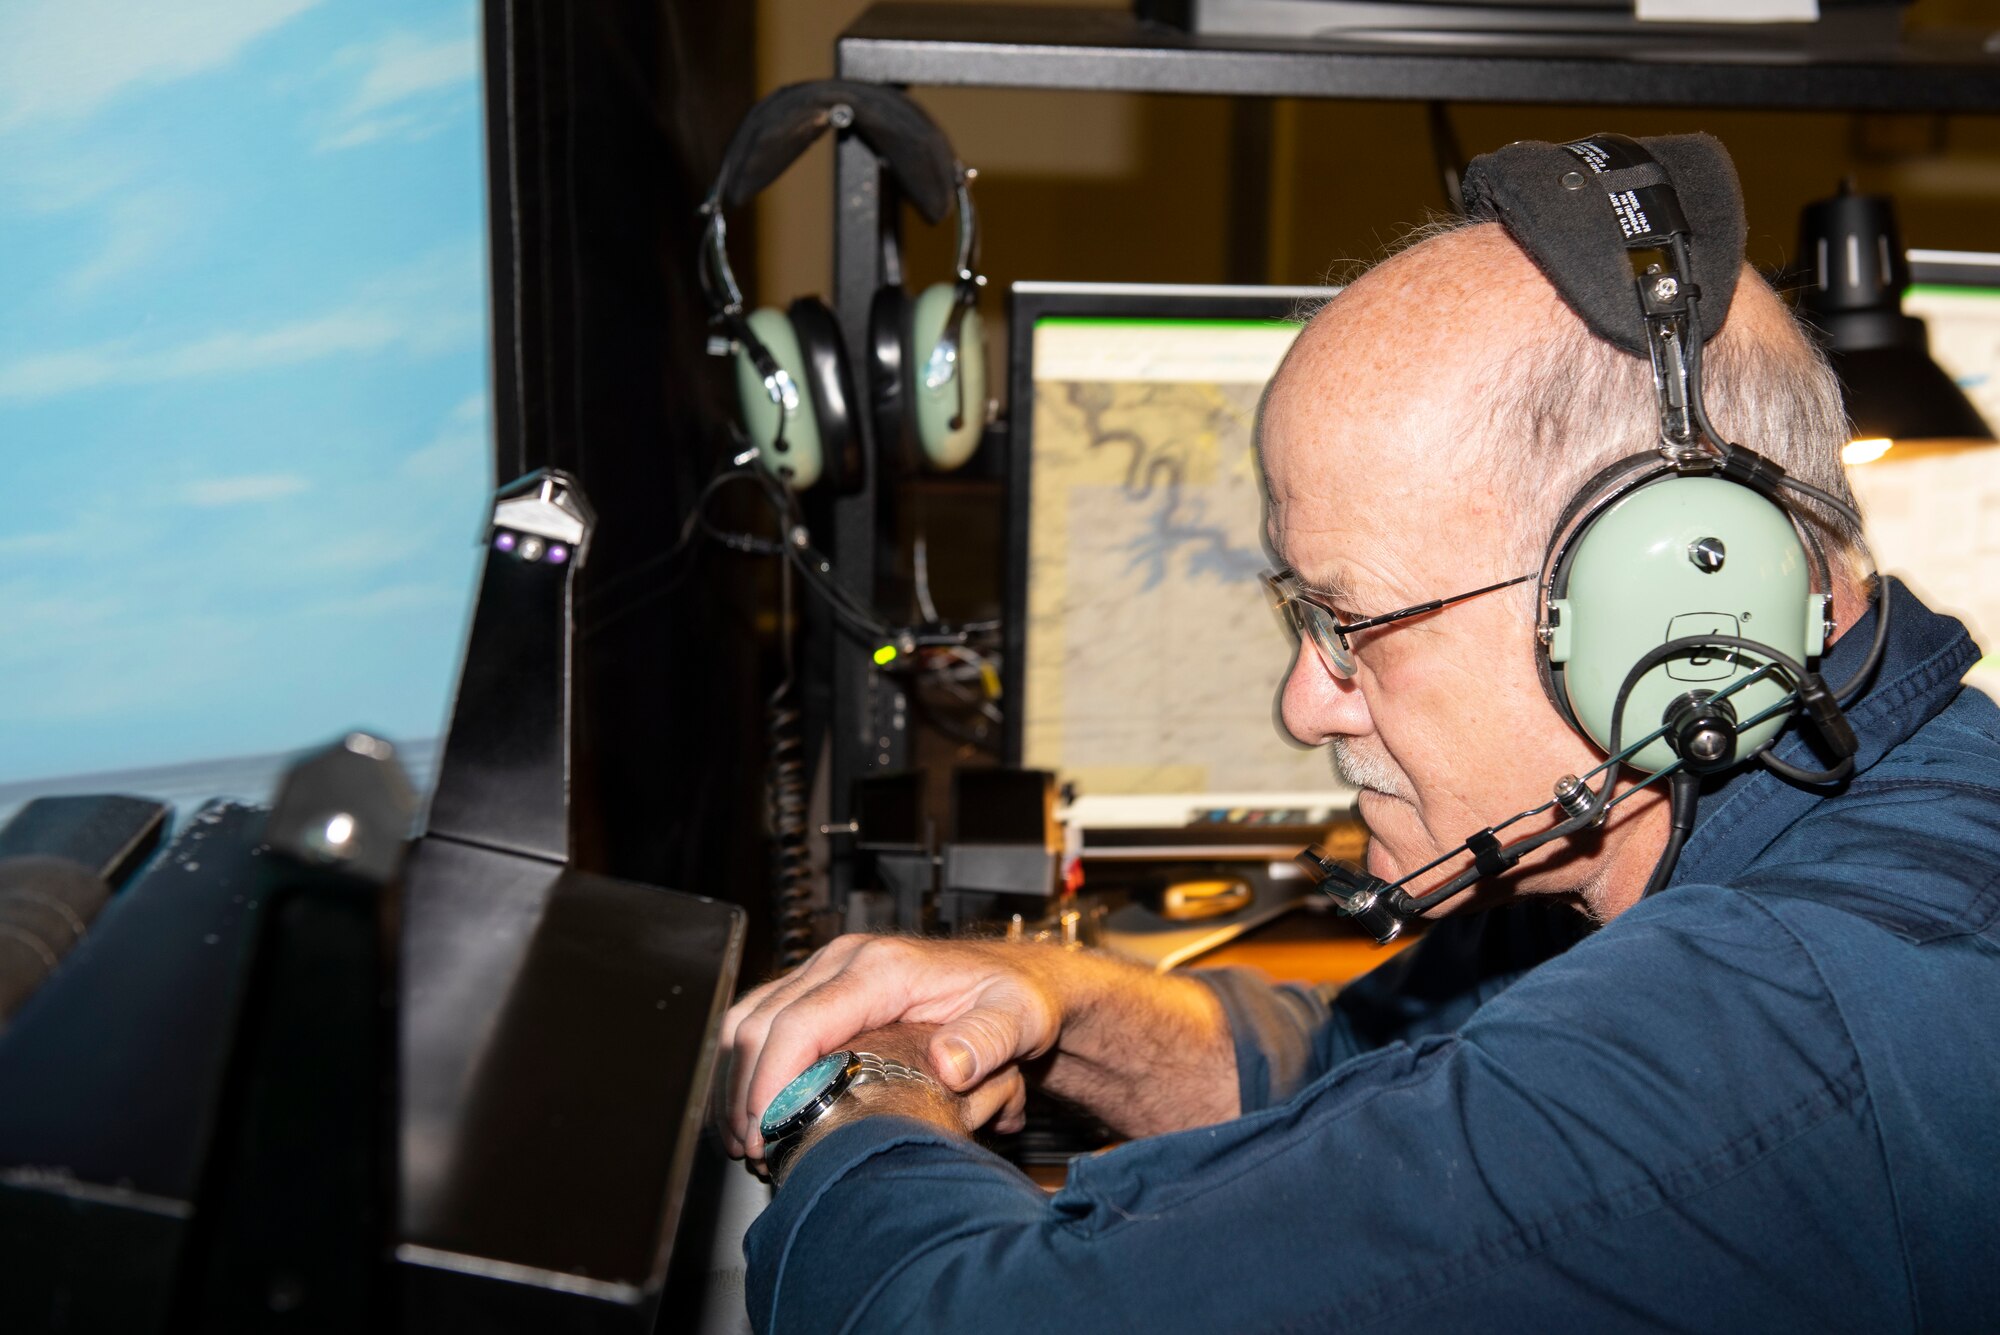 Tom Kline, 47th Operations Group T-38 lead instructor, monitors the controls of a student’s simulated flight at Laughlin Air Force Base, Texas on Jul. 19, 2021. The simulators are state of the art equipment that can replicate any environment or situation that they may face when piloting the aircraft. (U.S. Air Force photo by Airman 1st Class David Phaff)